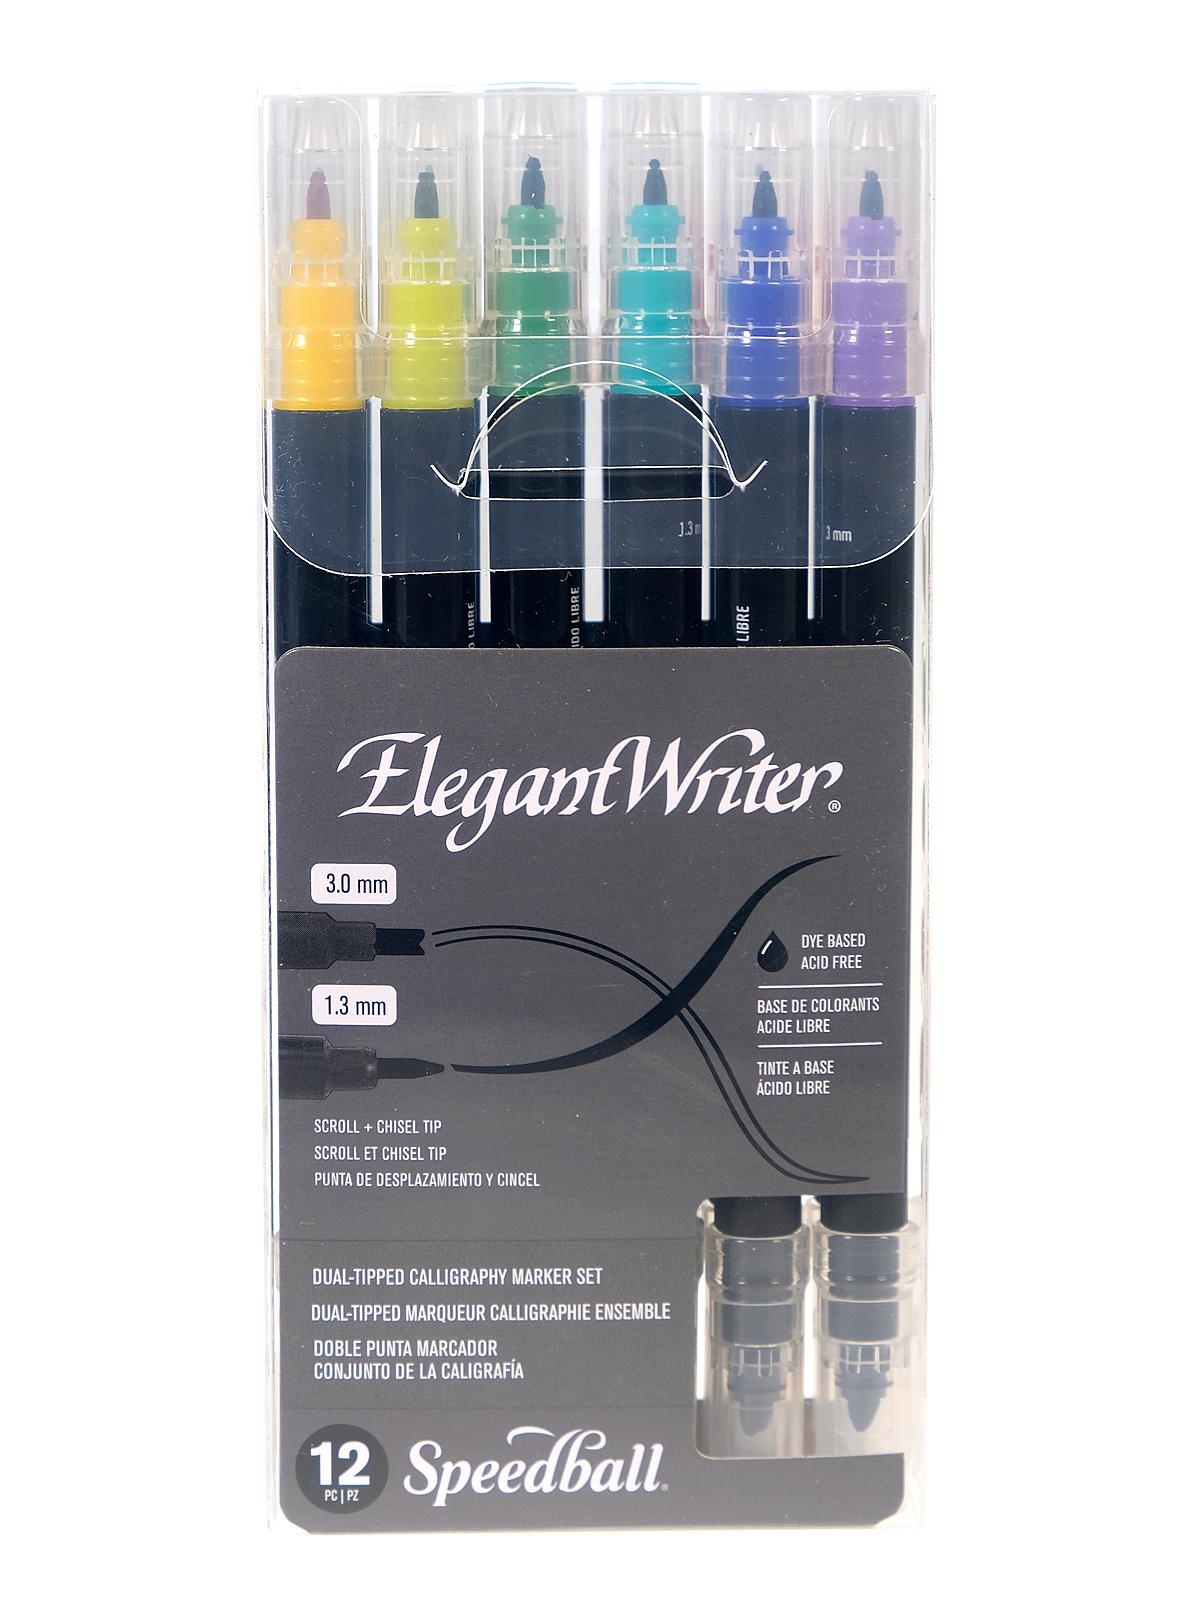 Elegant Writer Calligraphy Marker Sets Assorted Dual-tipped No. 2820